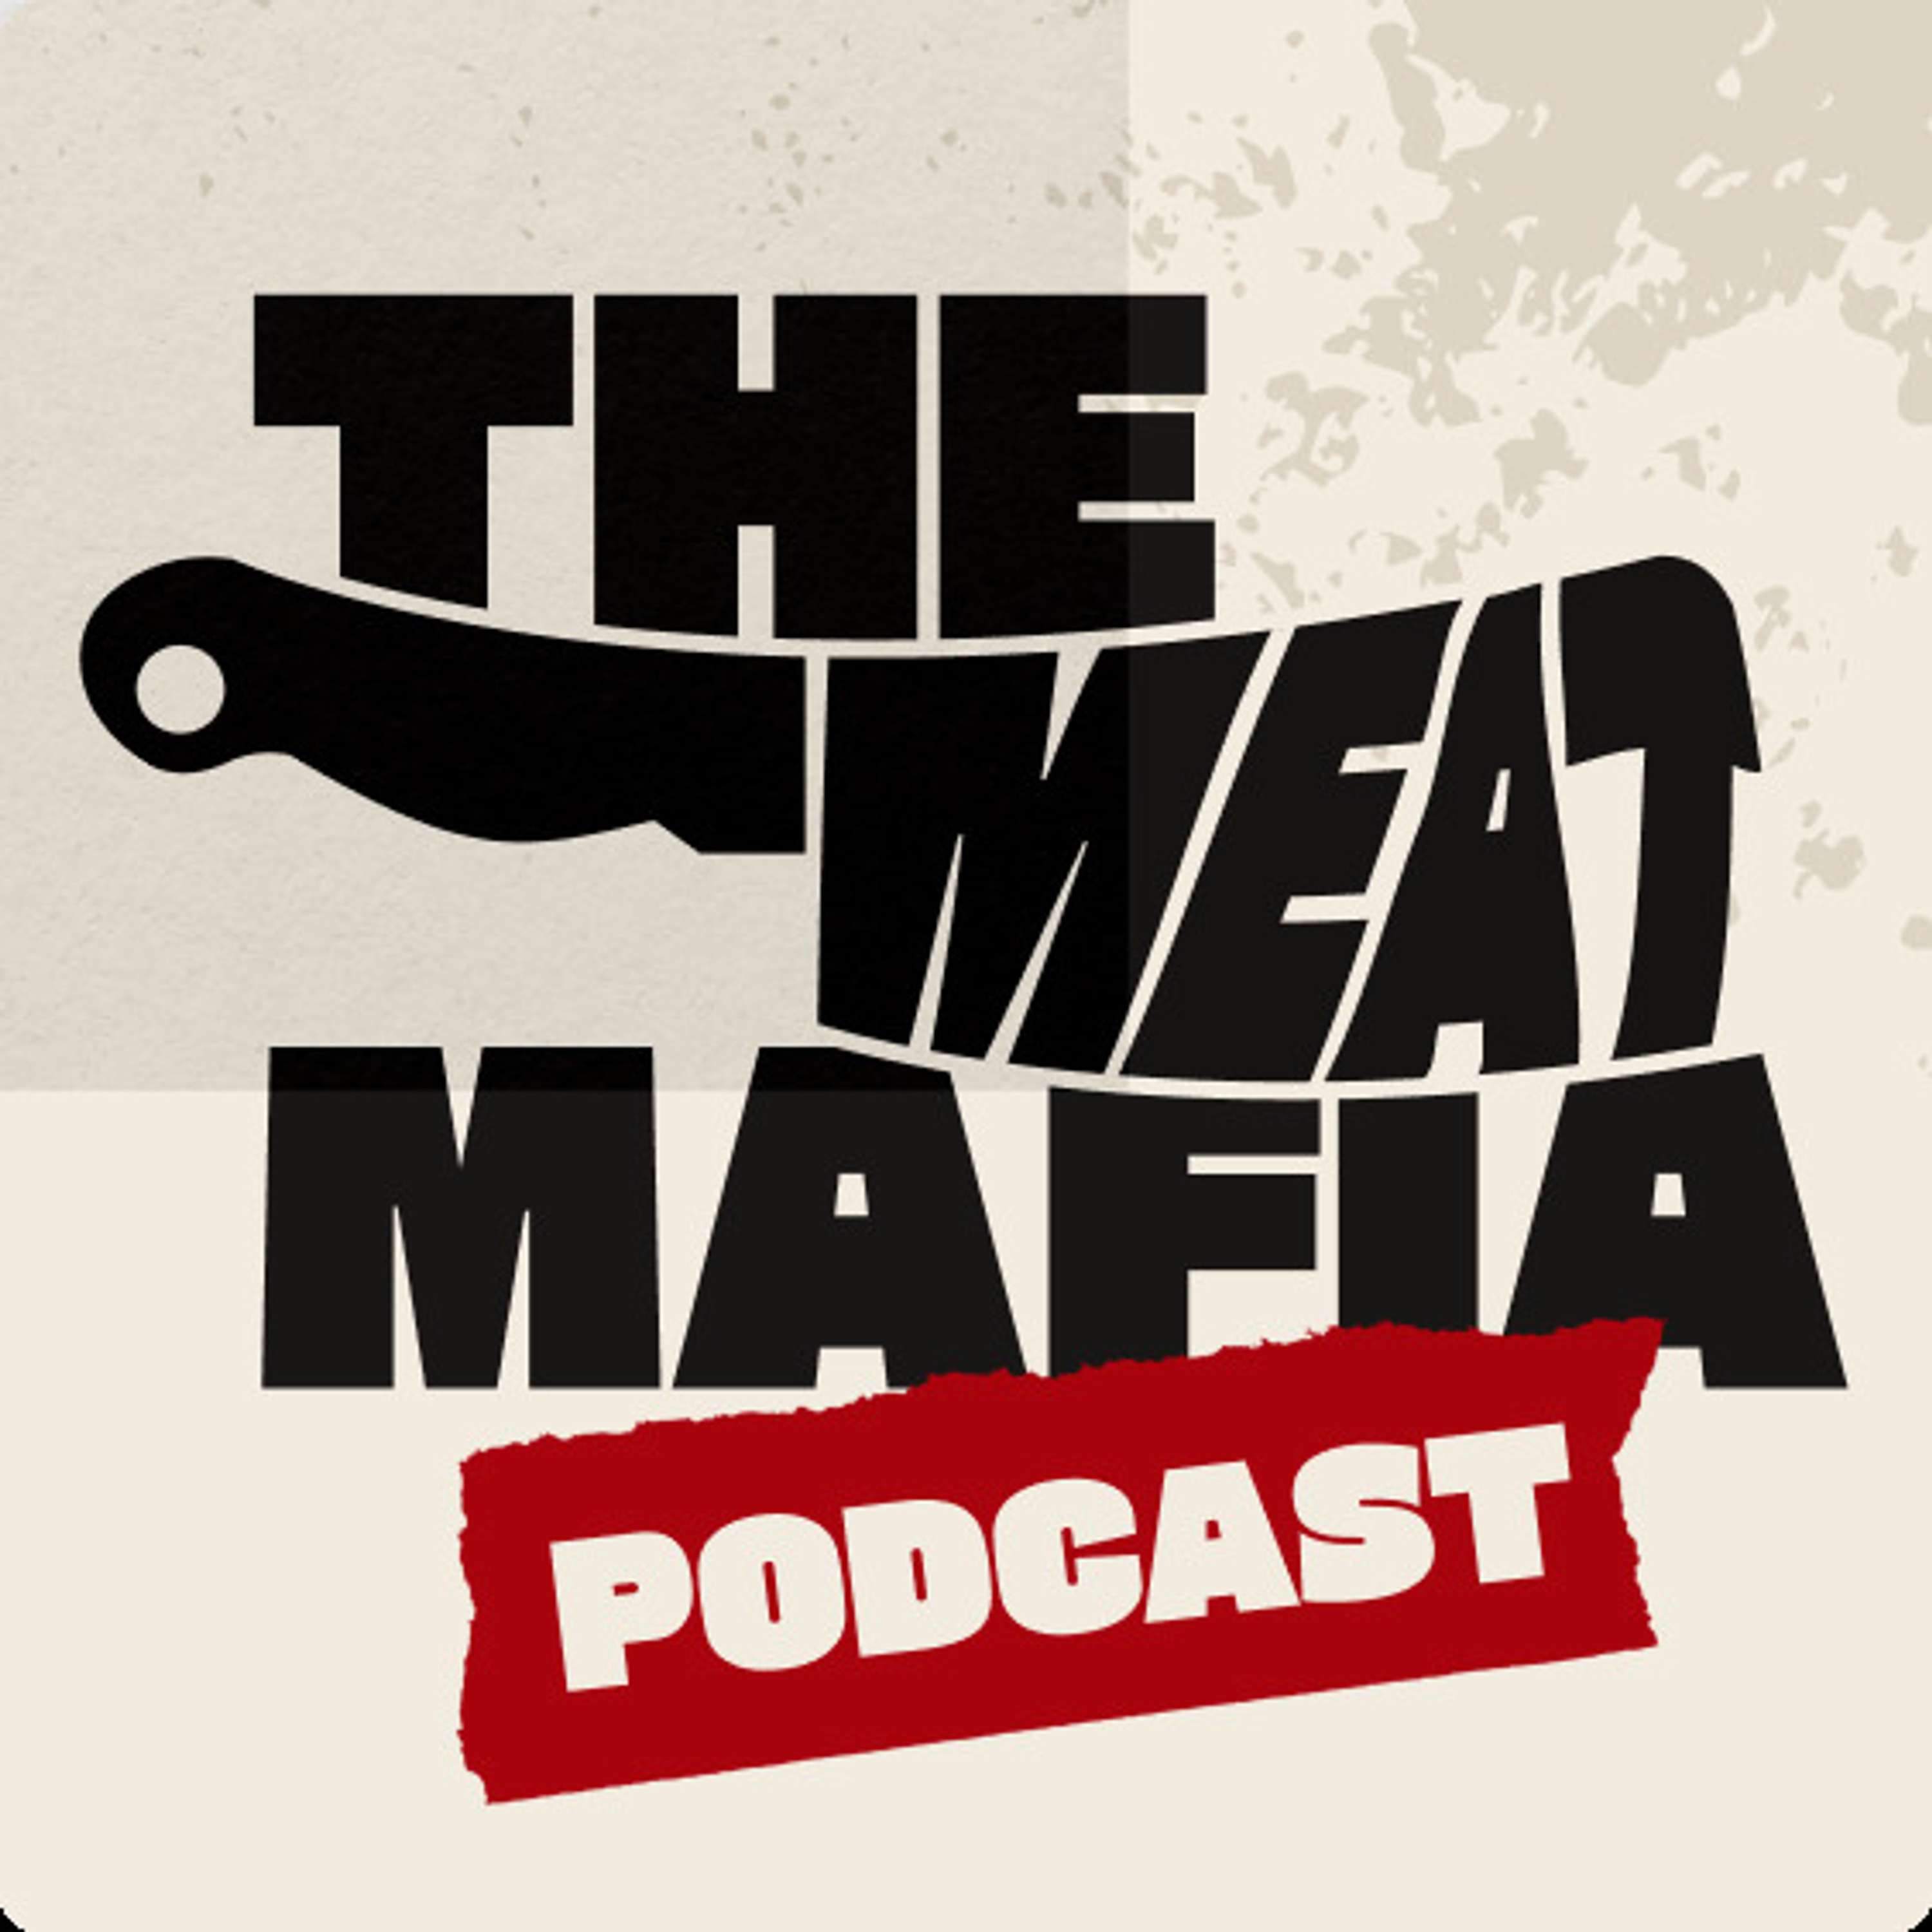 MAFIA MOMENTS: Meat is a Superfood with Dr. Shawn Baker, Dr. Anthony Chaffee, and Judy Cho